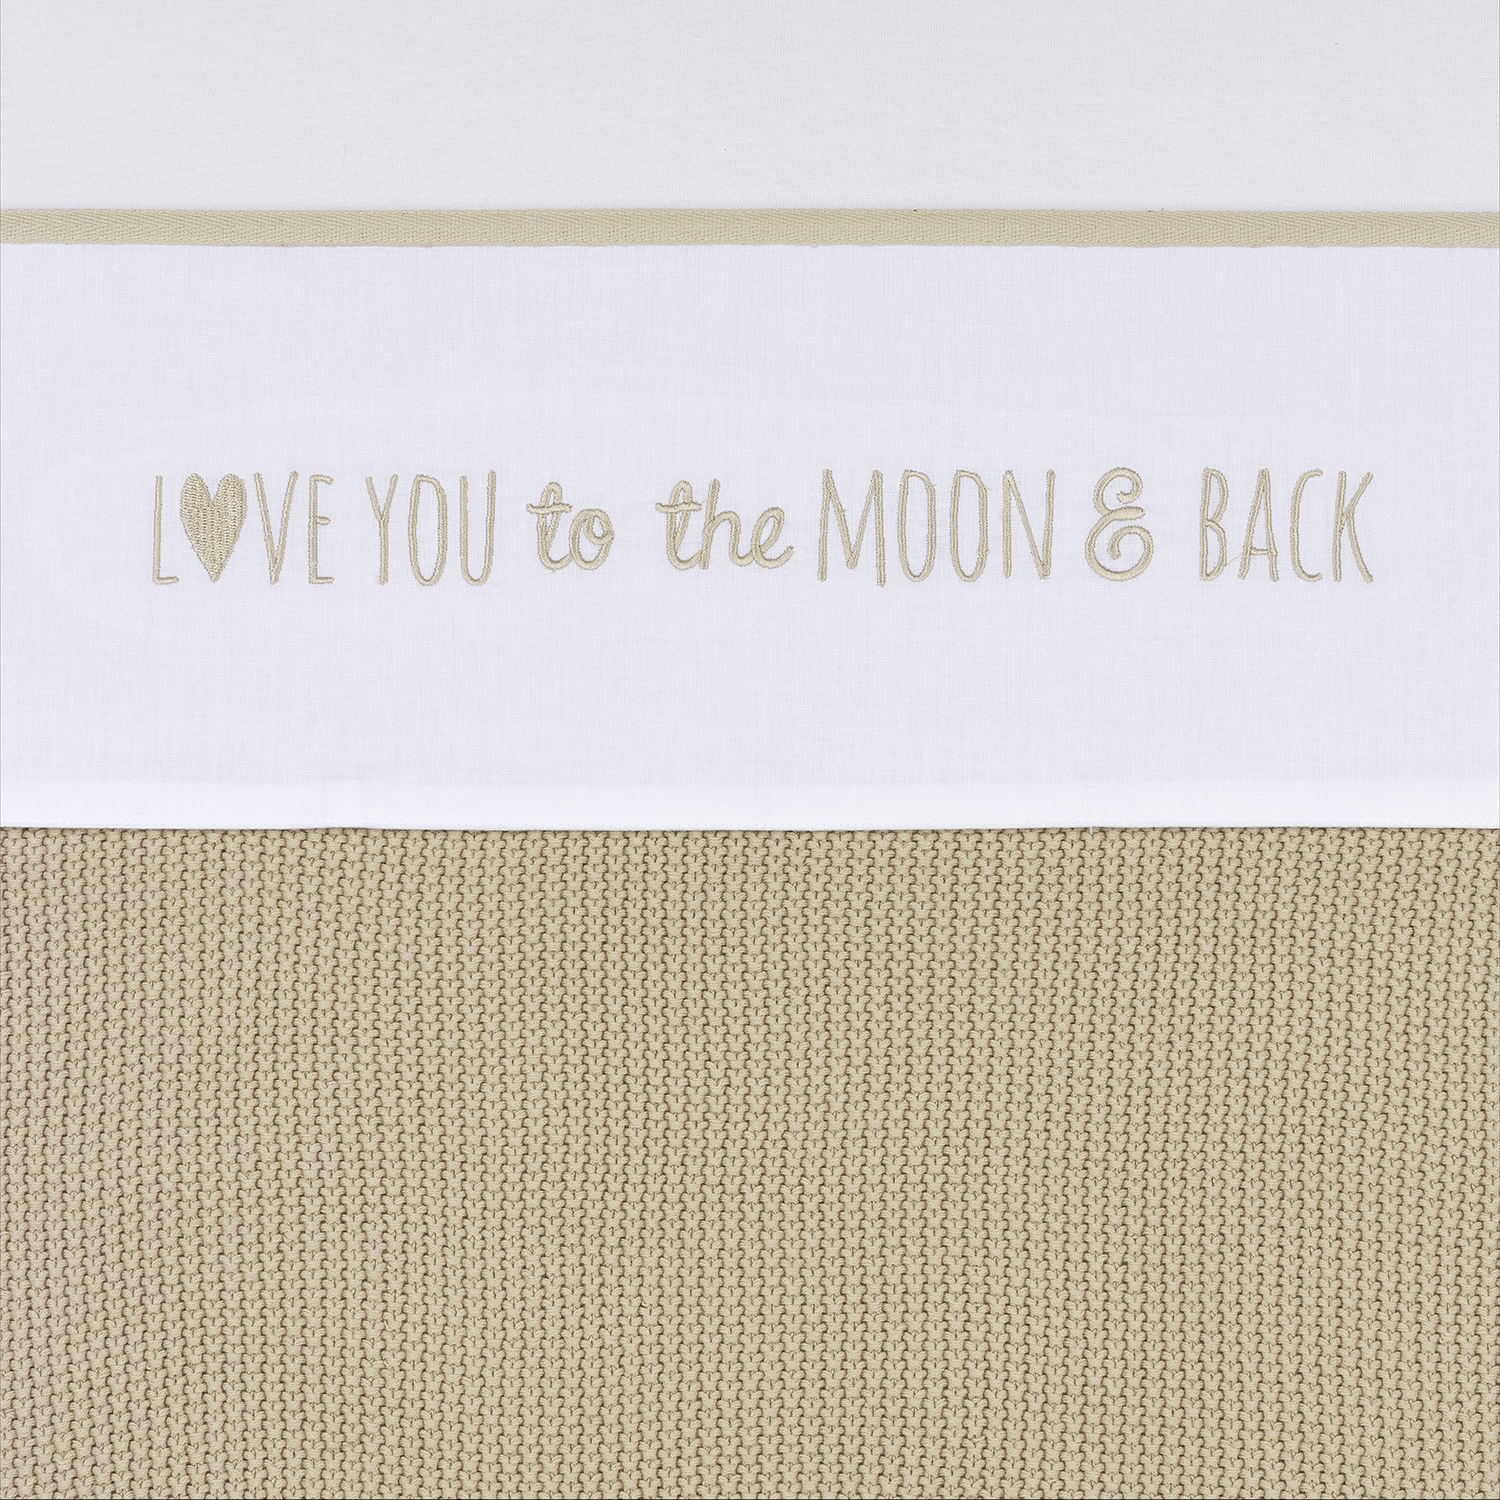 Bettlaken Wiege Love you to the moon & back - sand - 75x100cm